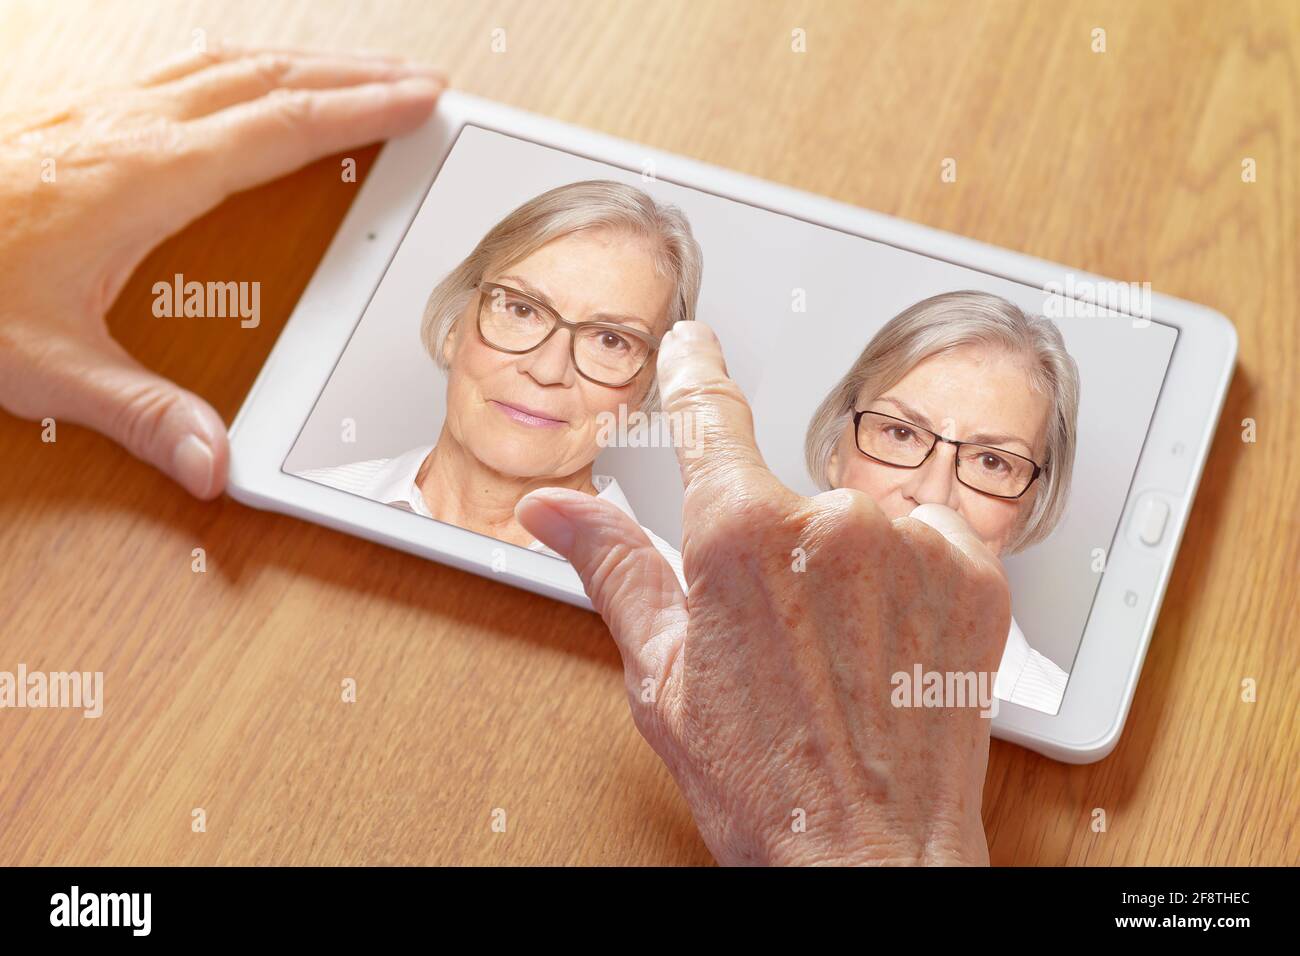 Shopping eyeglasses online concept: hands of a senior woman choosing her new glasses at home on a tablet computer. Stock Photo